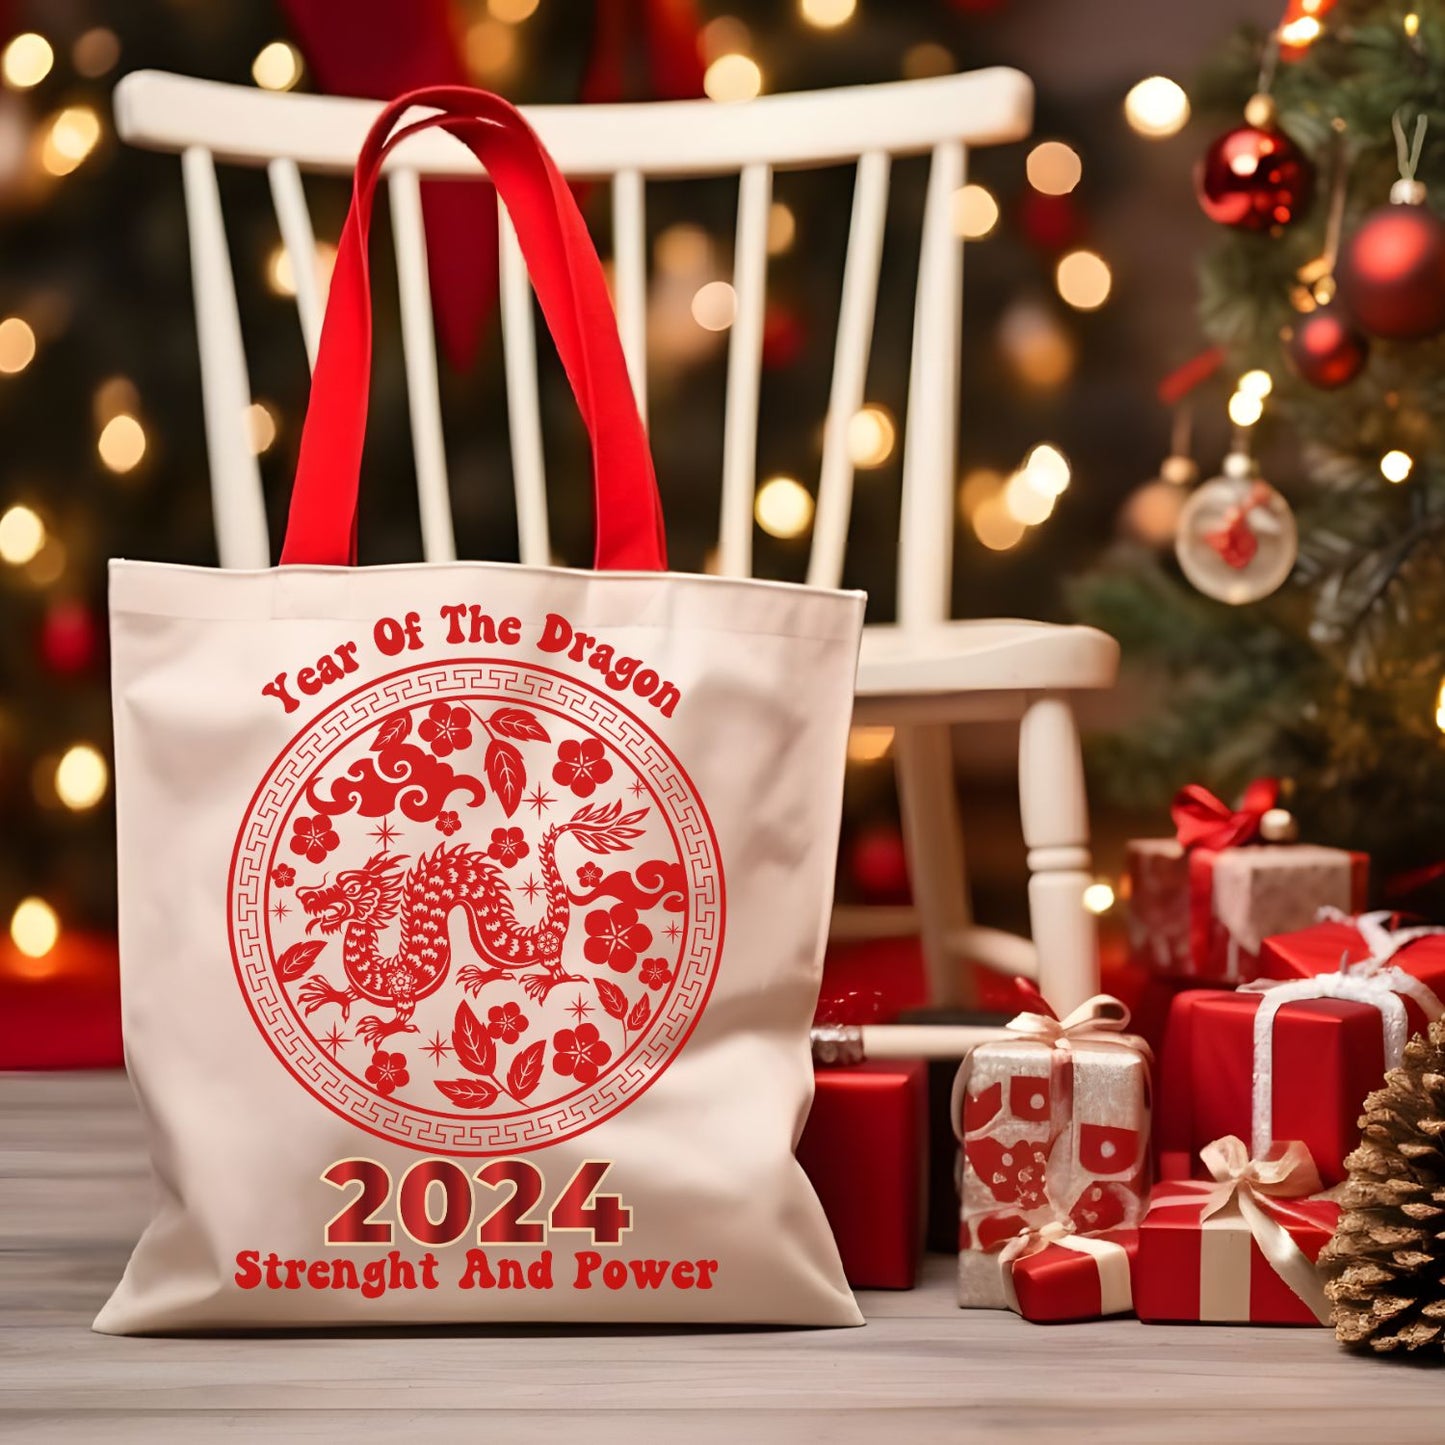 Year of the Dragon Tote Bag - 2024 Chinese Zodiac Canvas Shopper with 5 Strap Colors Accessories   